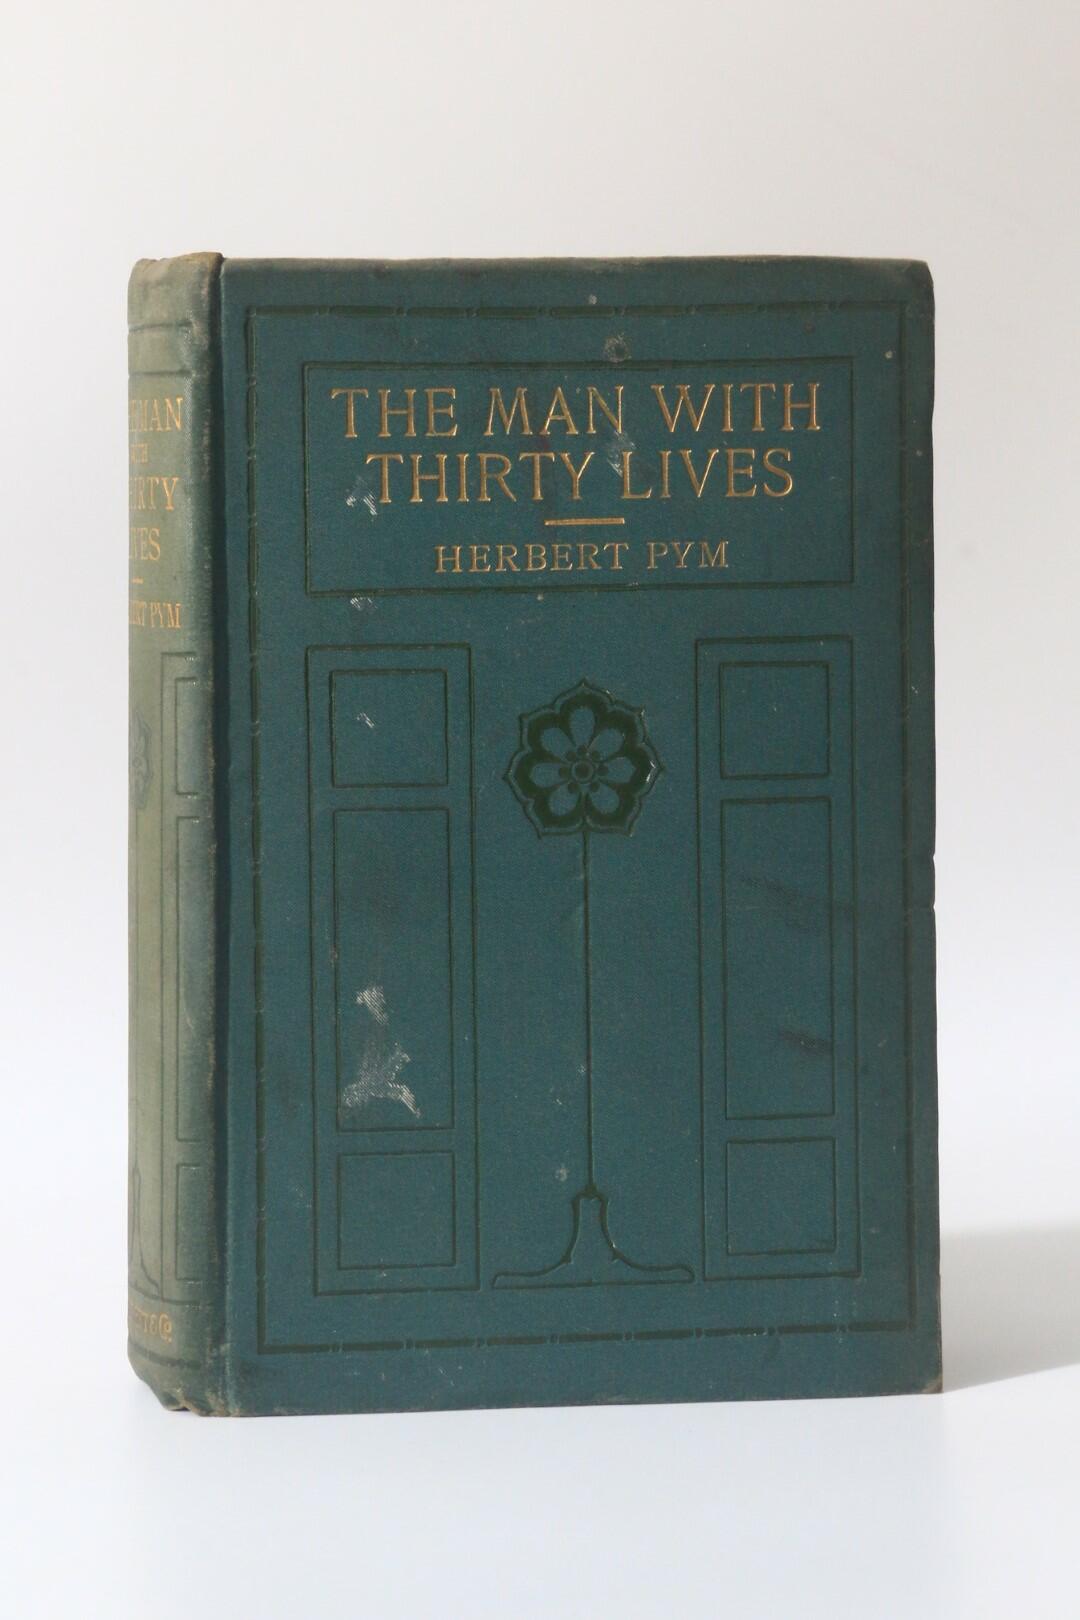 Herbert Pym - The Man With Thirty Lives - Everett & Co., 1909, First Edition.